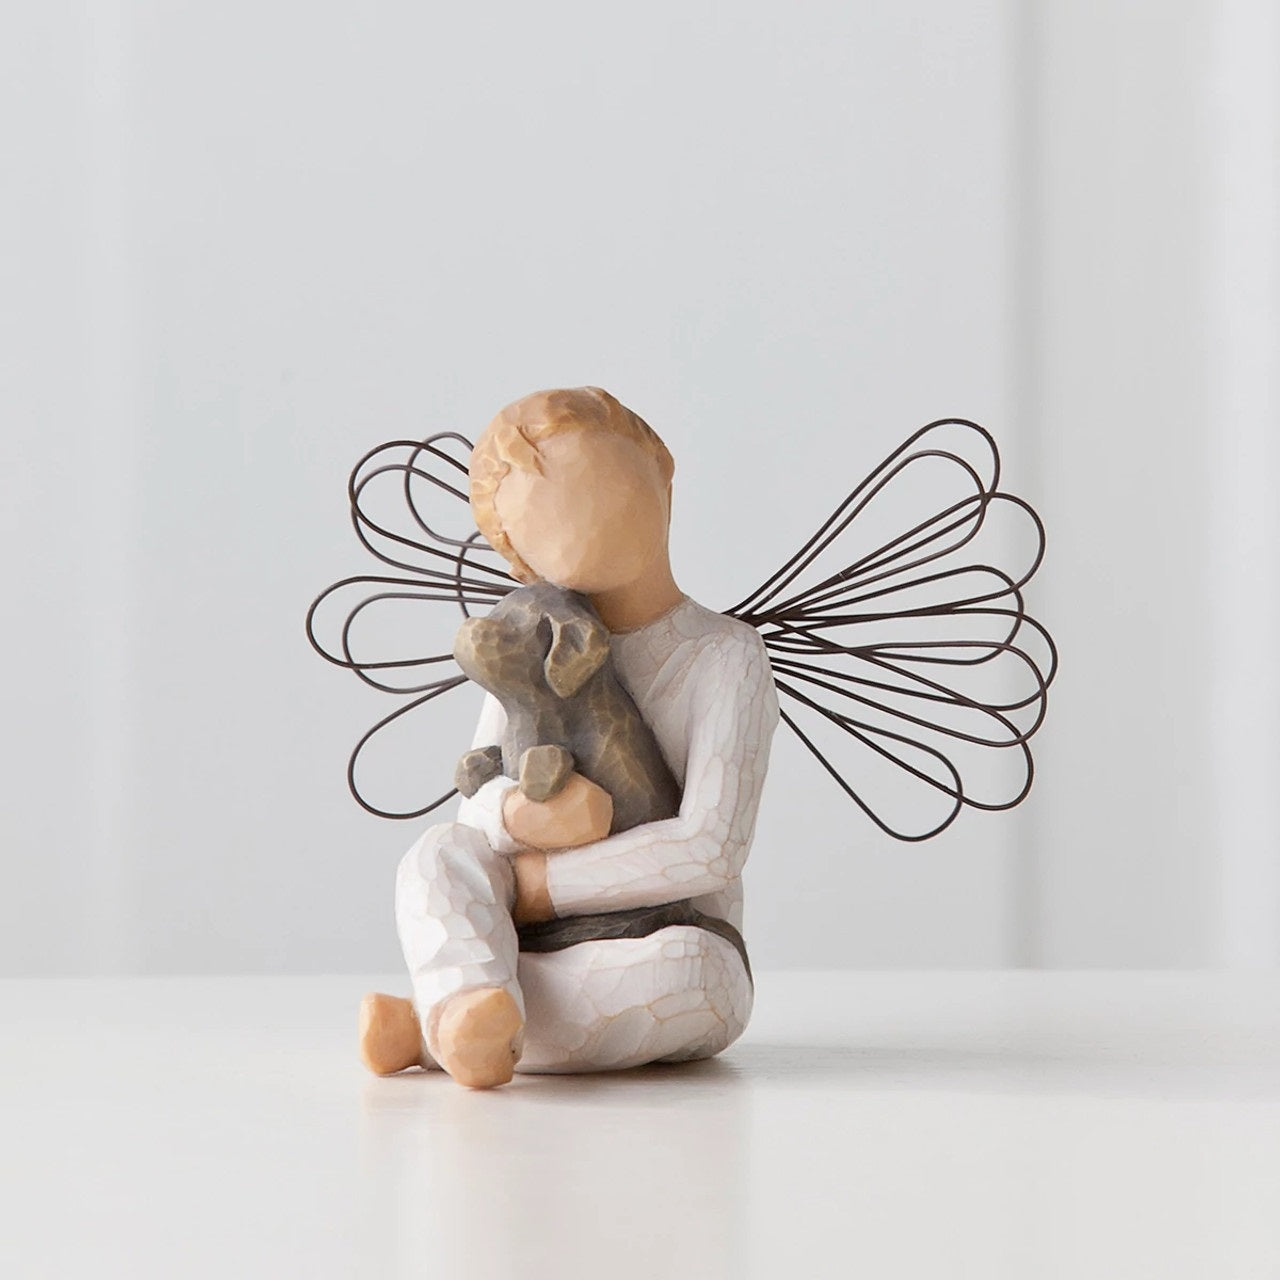 Willow Tree Angel of Comfort  A gift to express sympathy, comfort, remembrance and healing. A sweet little boy angel, hugging his best friend. Angel of Comfort is the only boy figure with wings.